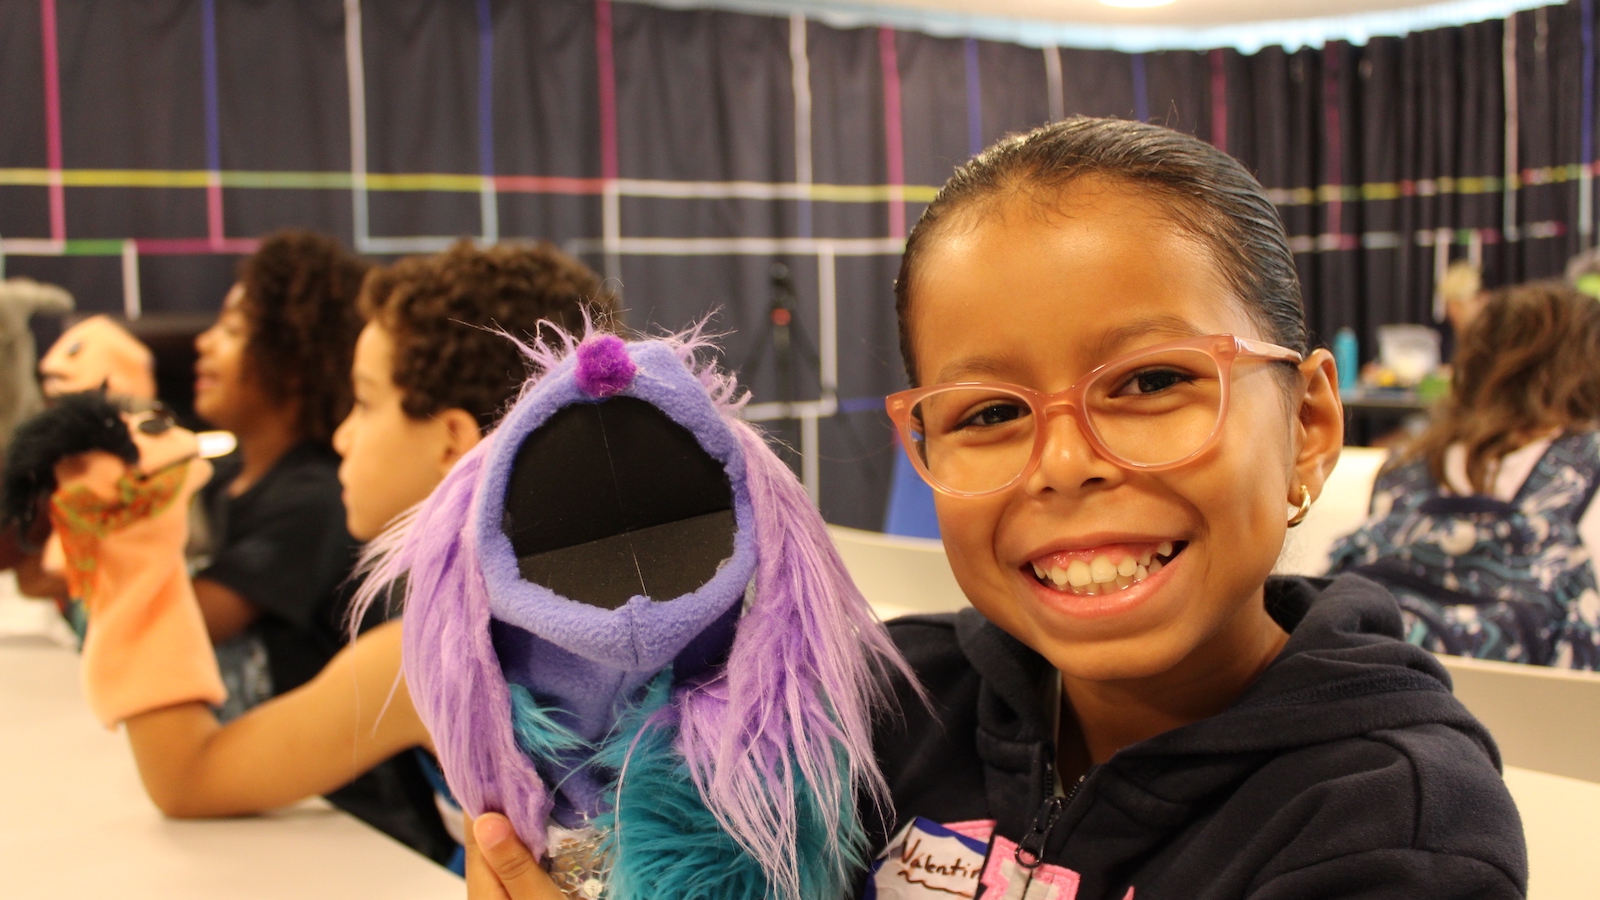 A little girl in glasses holds up a puppet and smiles at camera